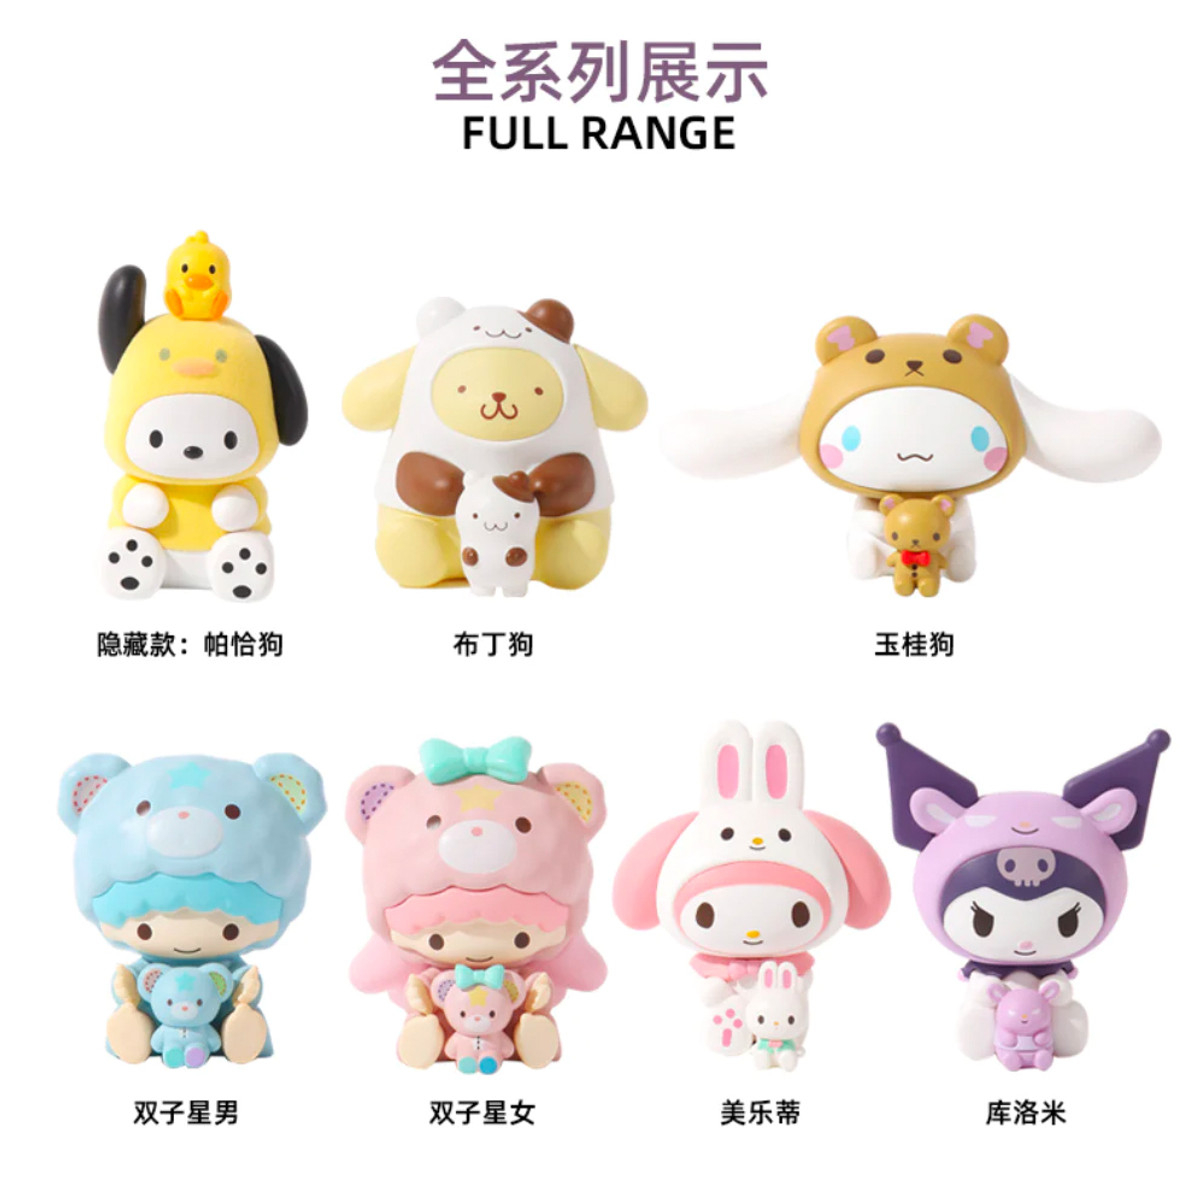 New Sanrio Characters Surprise Boxes 💜💜 Now available exclusively at  @SanrioTT